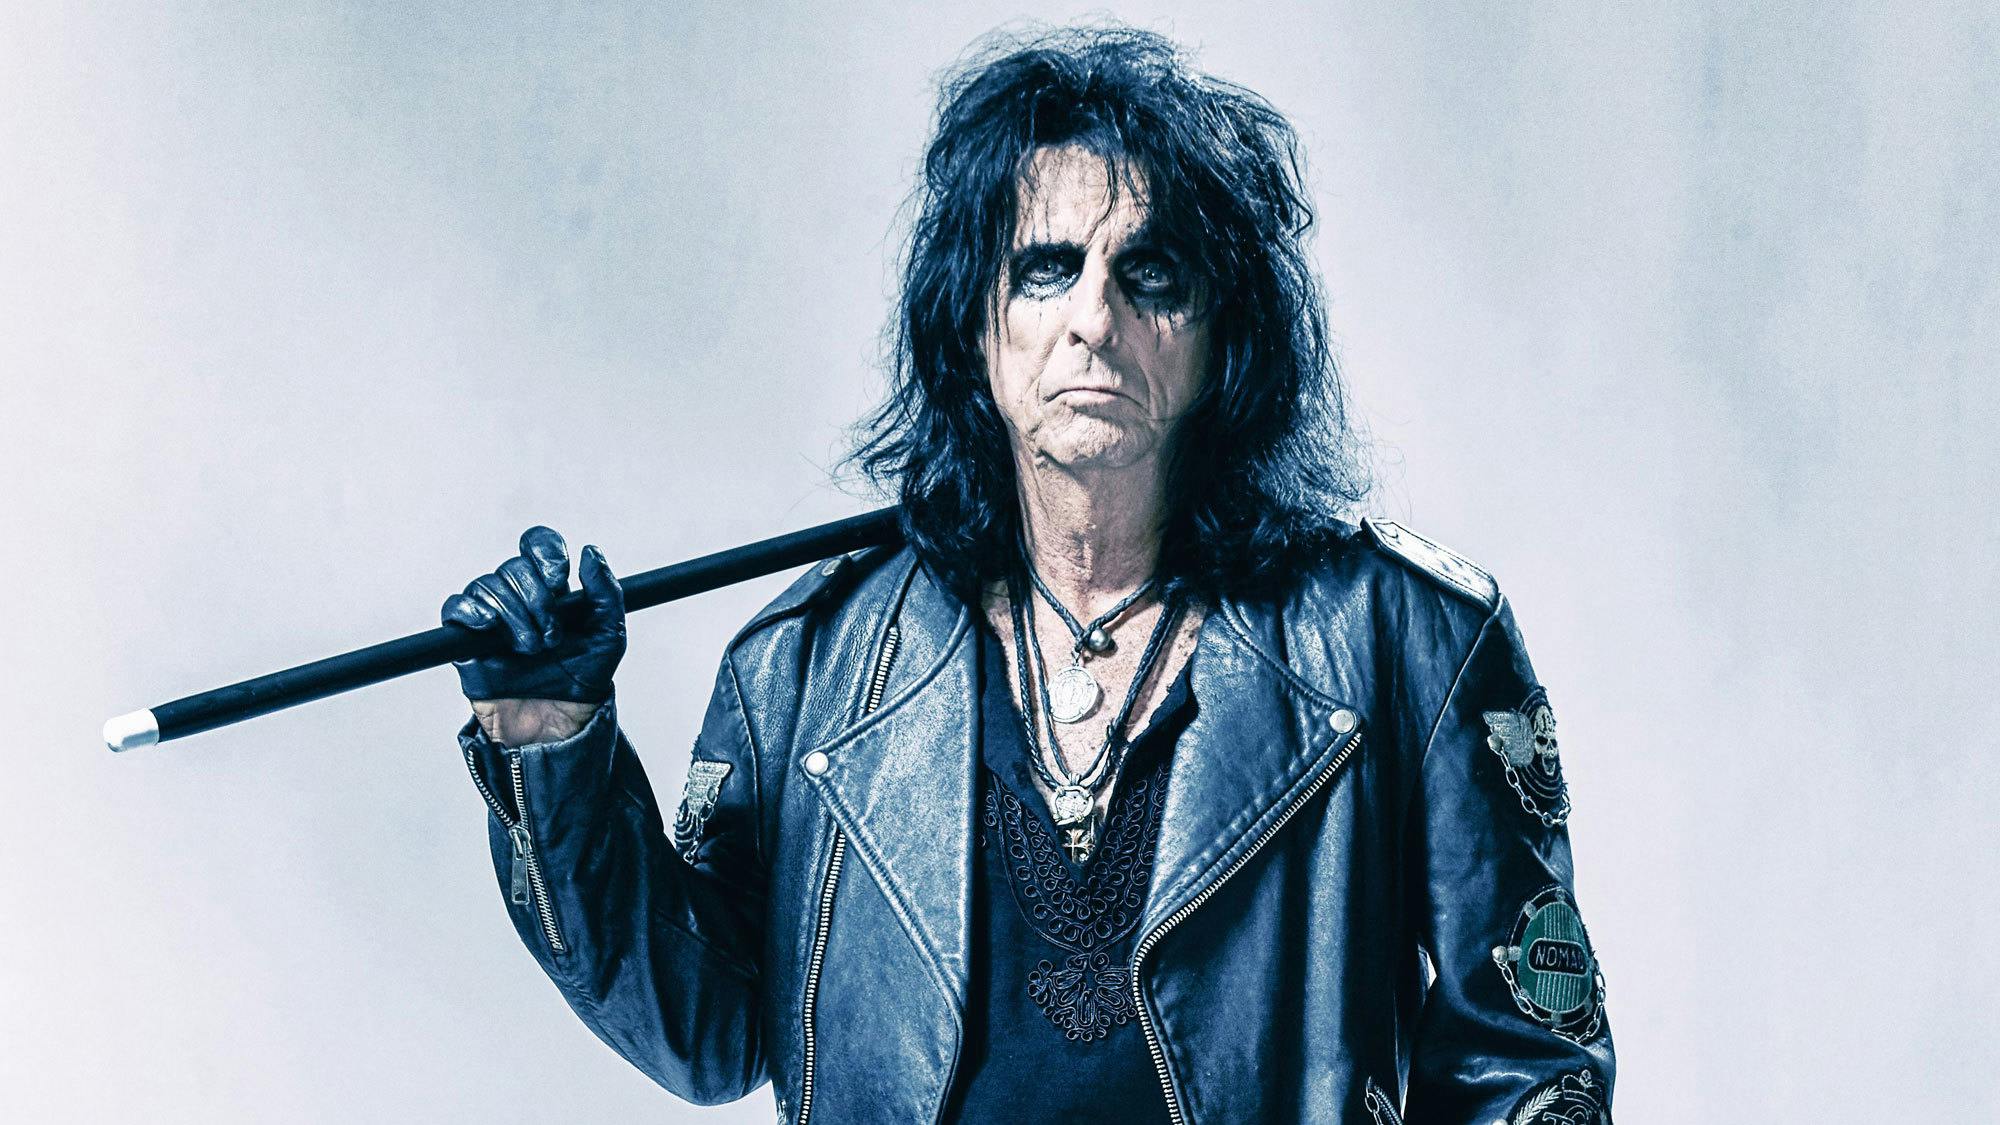 Alice Cooper: “I will never, ever outgrow rock’n’roll. And I will never, ever tell my band to turn the volume down”